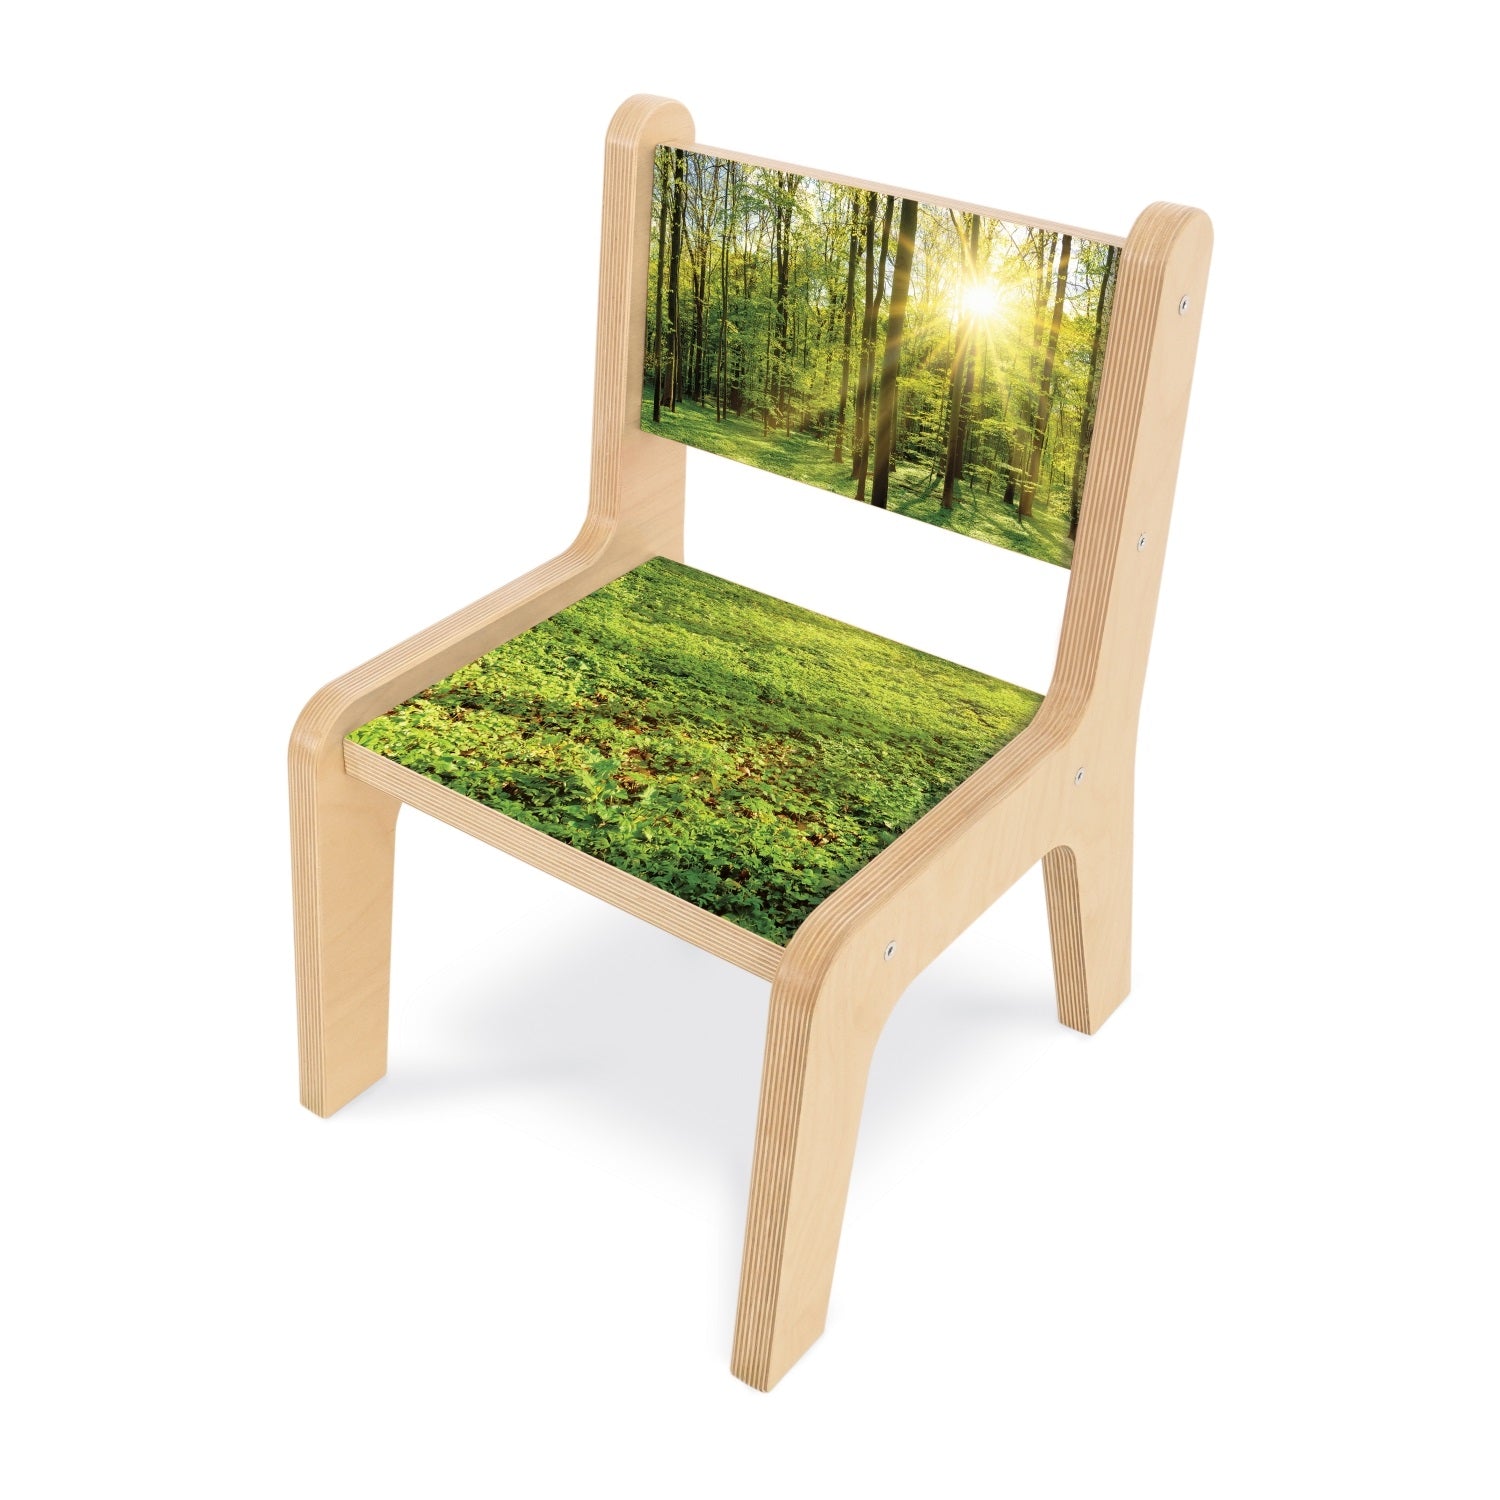 Nature View 10" H Summer Chair